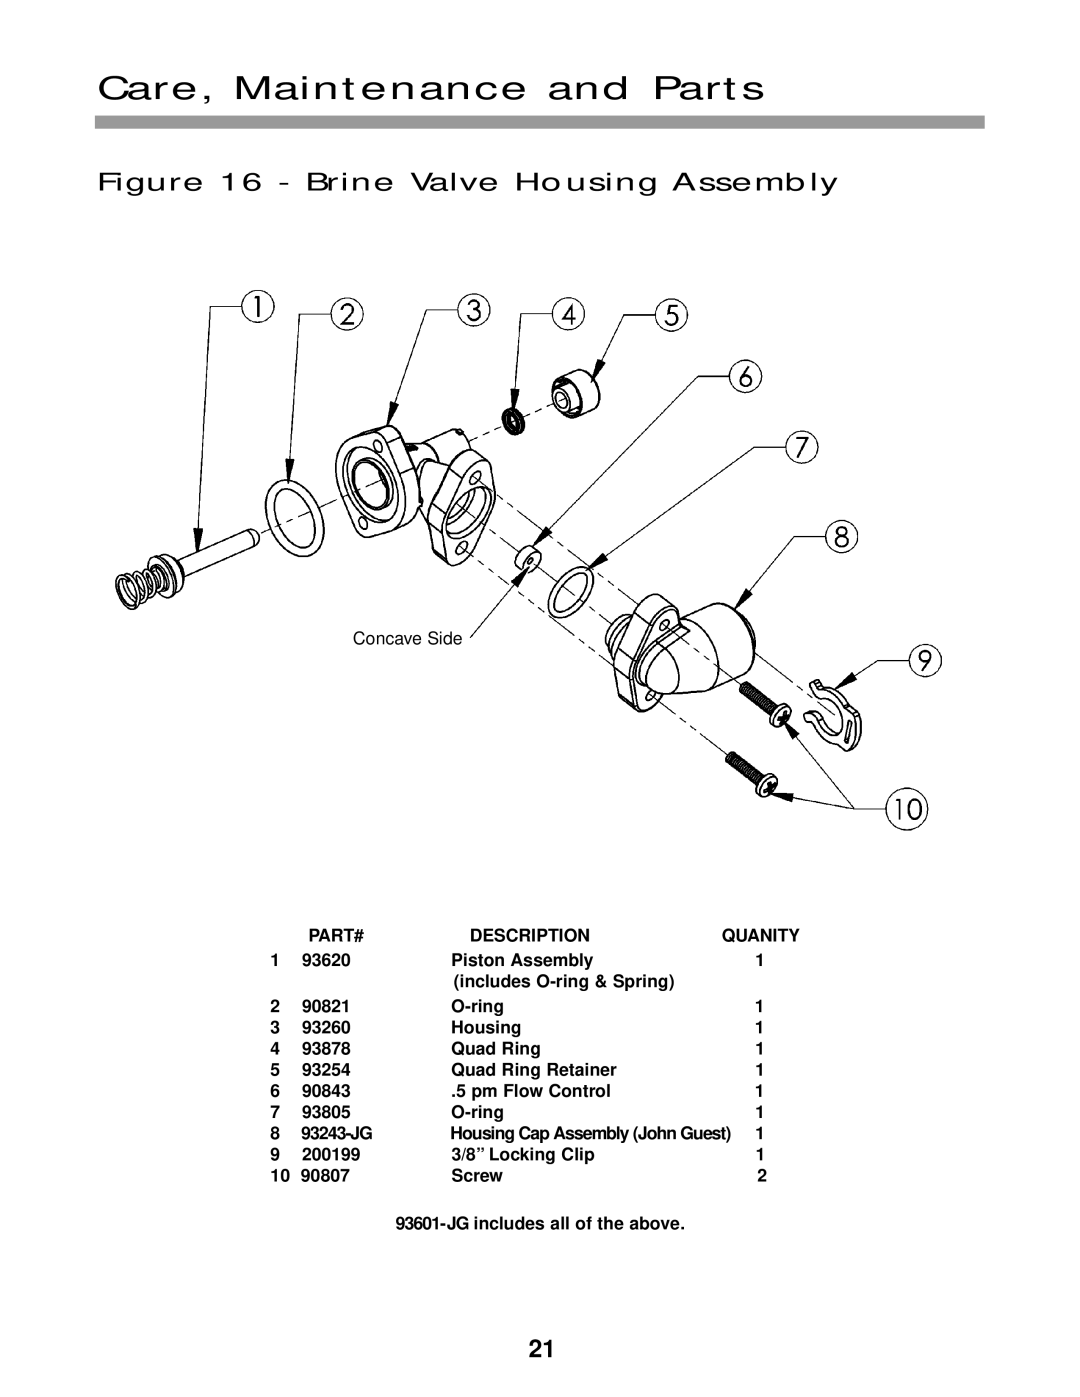 Water Boss 700, 900, 550 service manual Brine Valve Housing Assembly, Care, Maintenance and Parts 